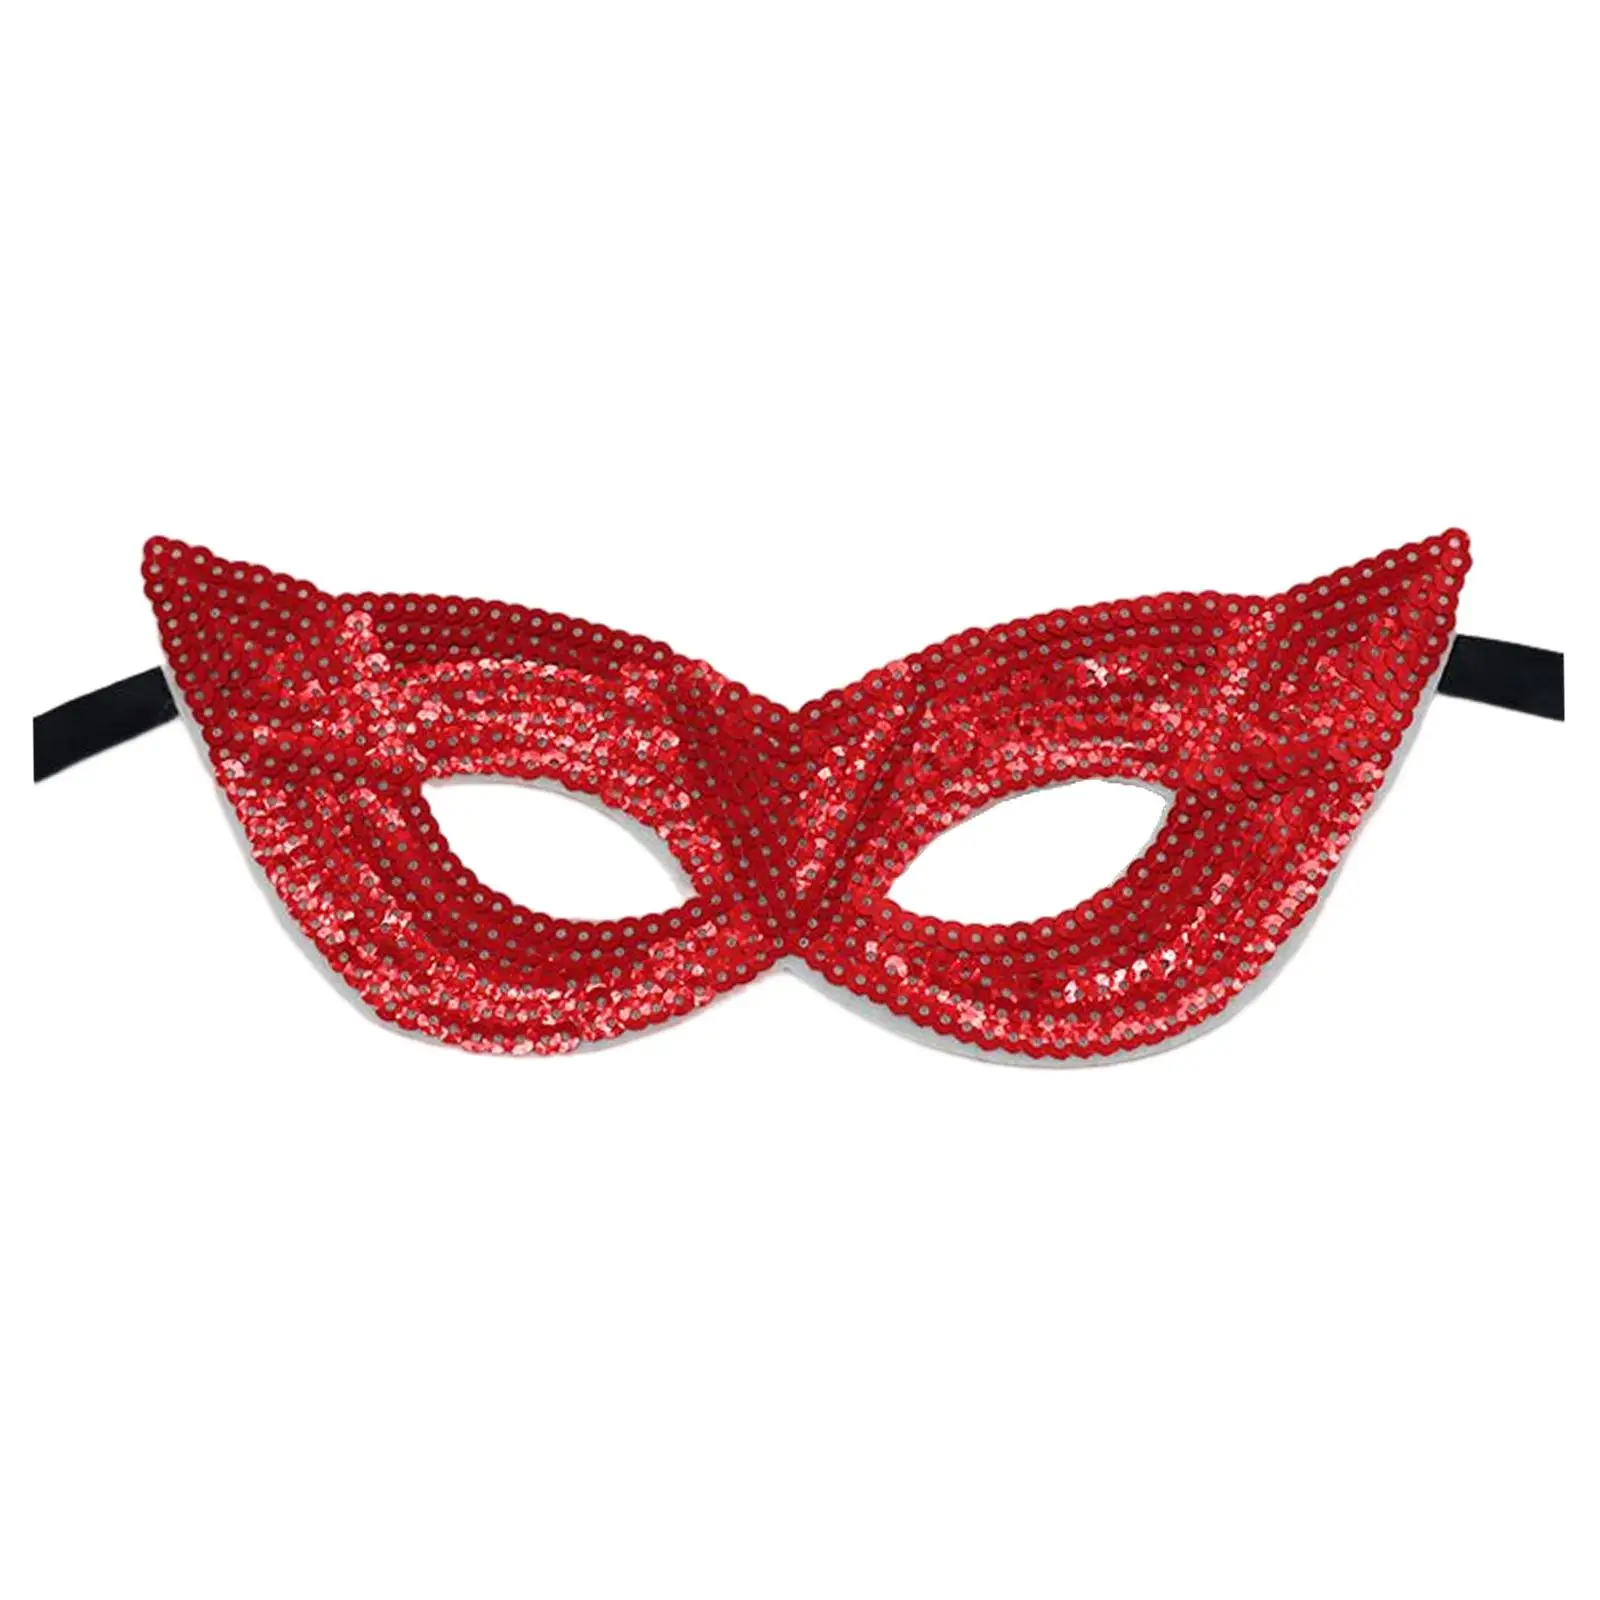 Glitter Masquerade Eye Mask Sequin Party Mask Half Cover Fancy Dress for Carnival Prom